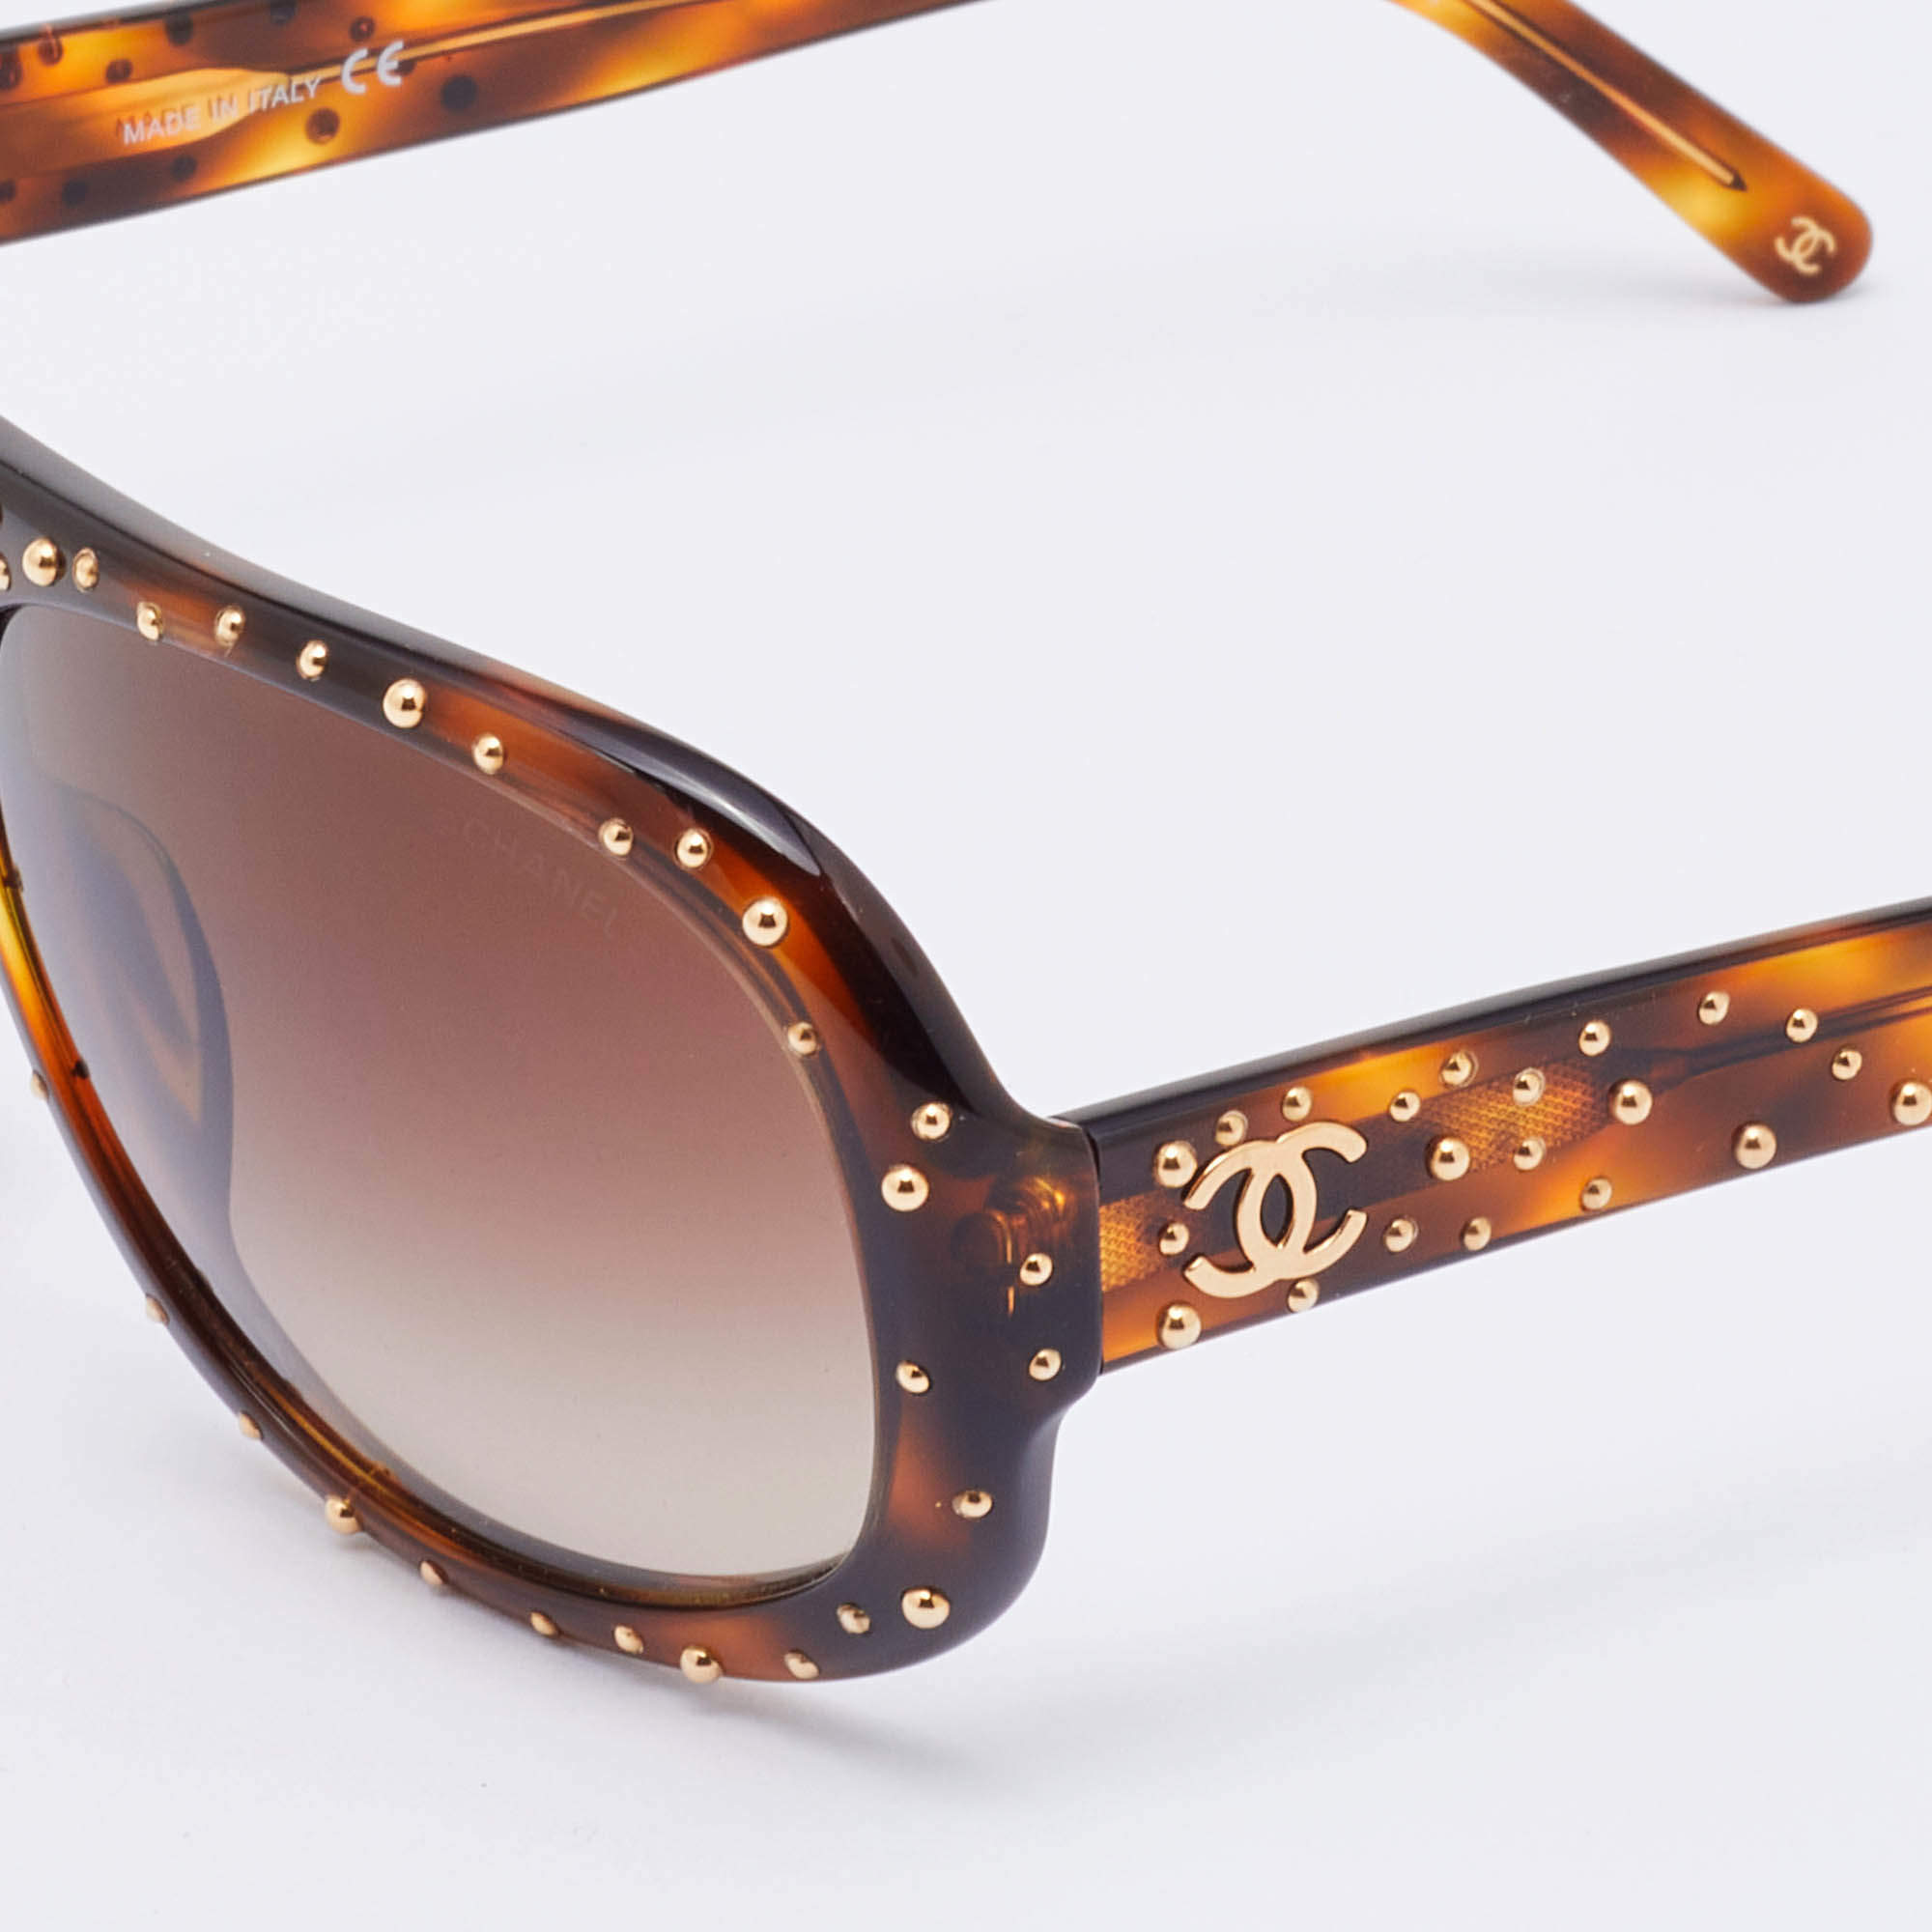 Chanel Brown/Brown Gradient 5135 Studded Aviator Sunglasses